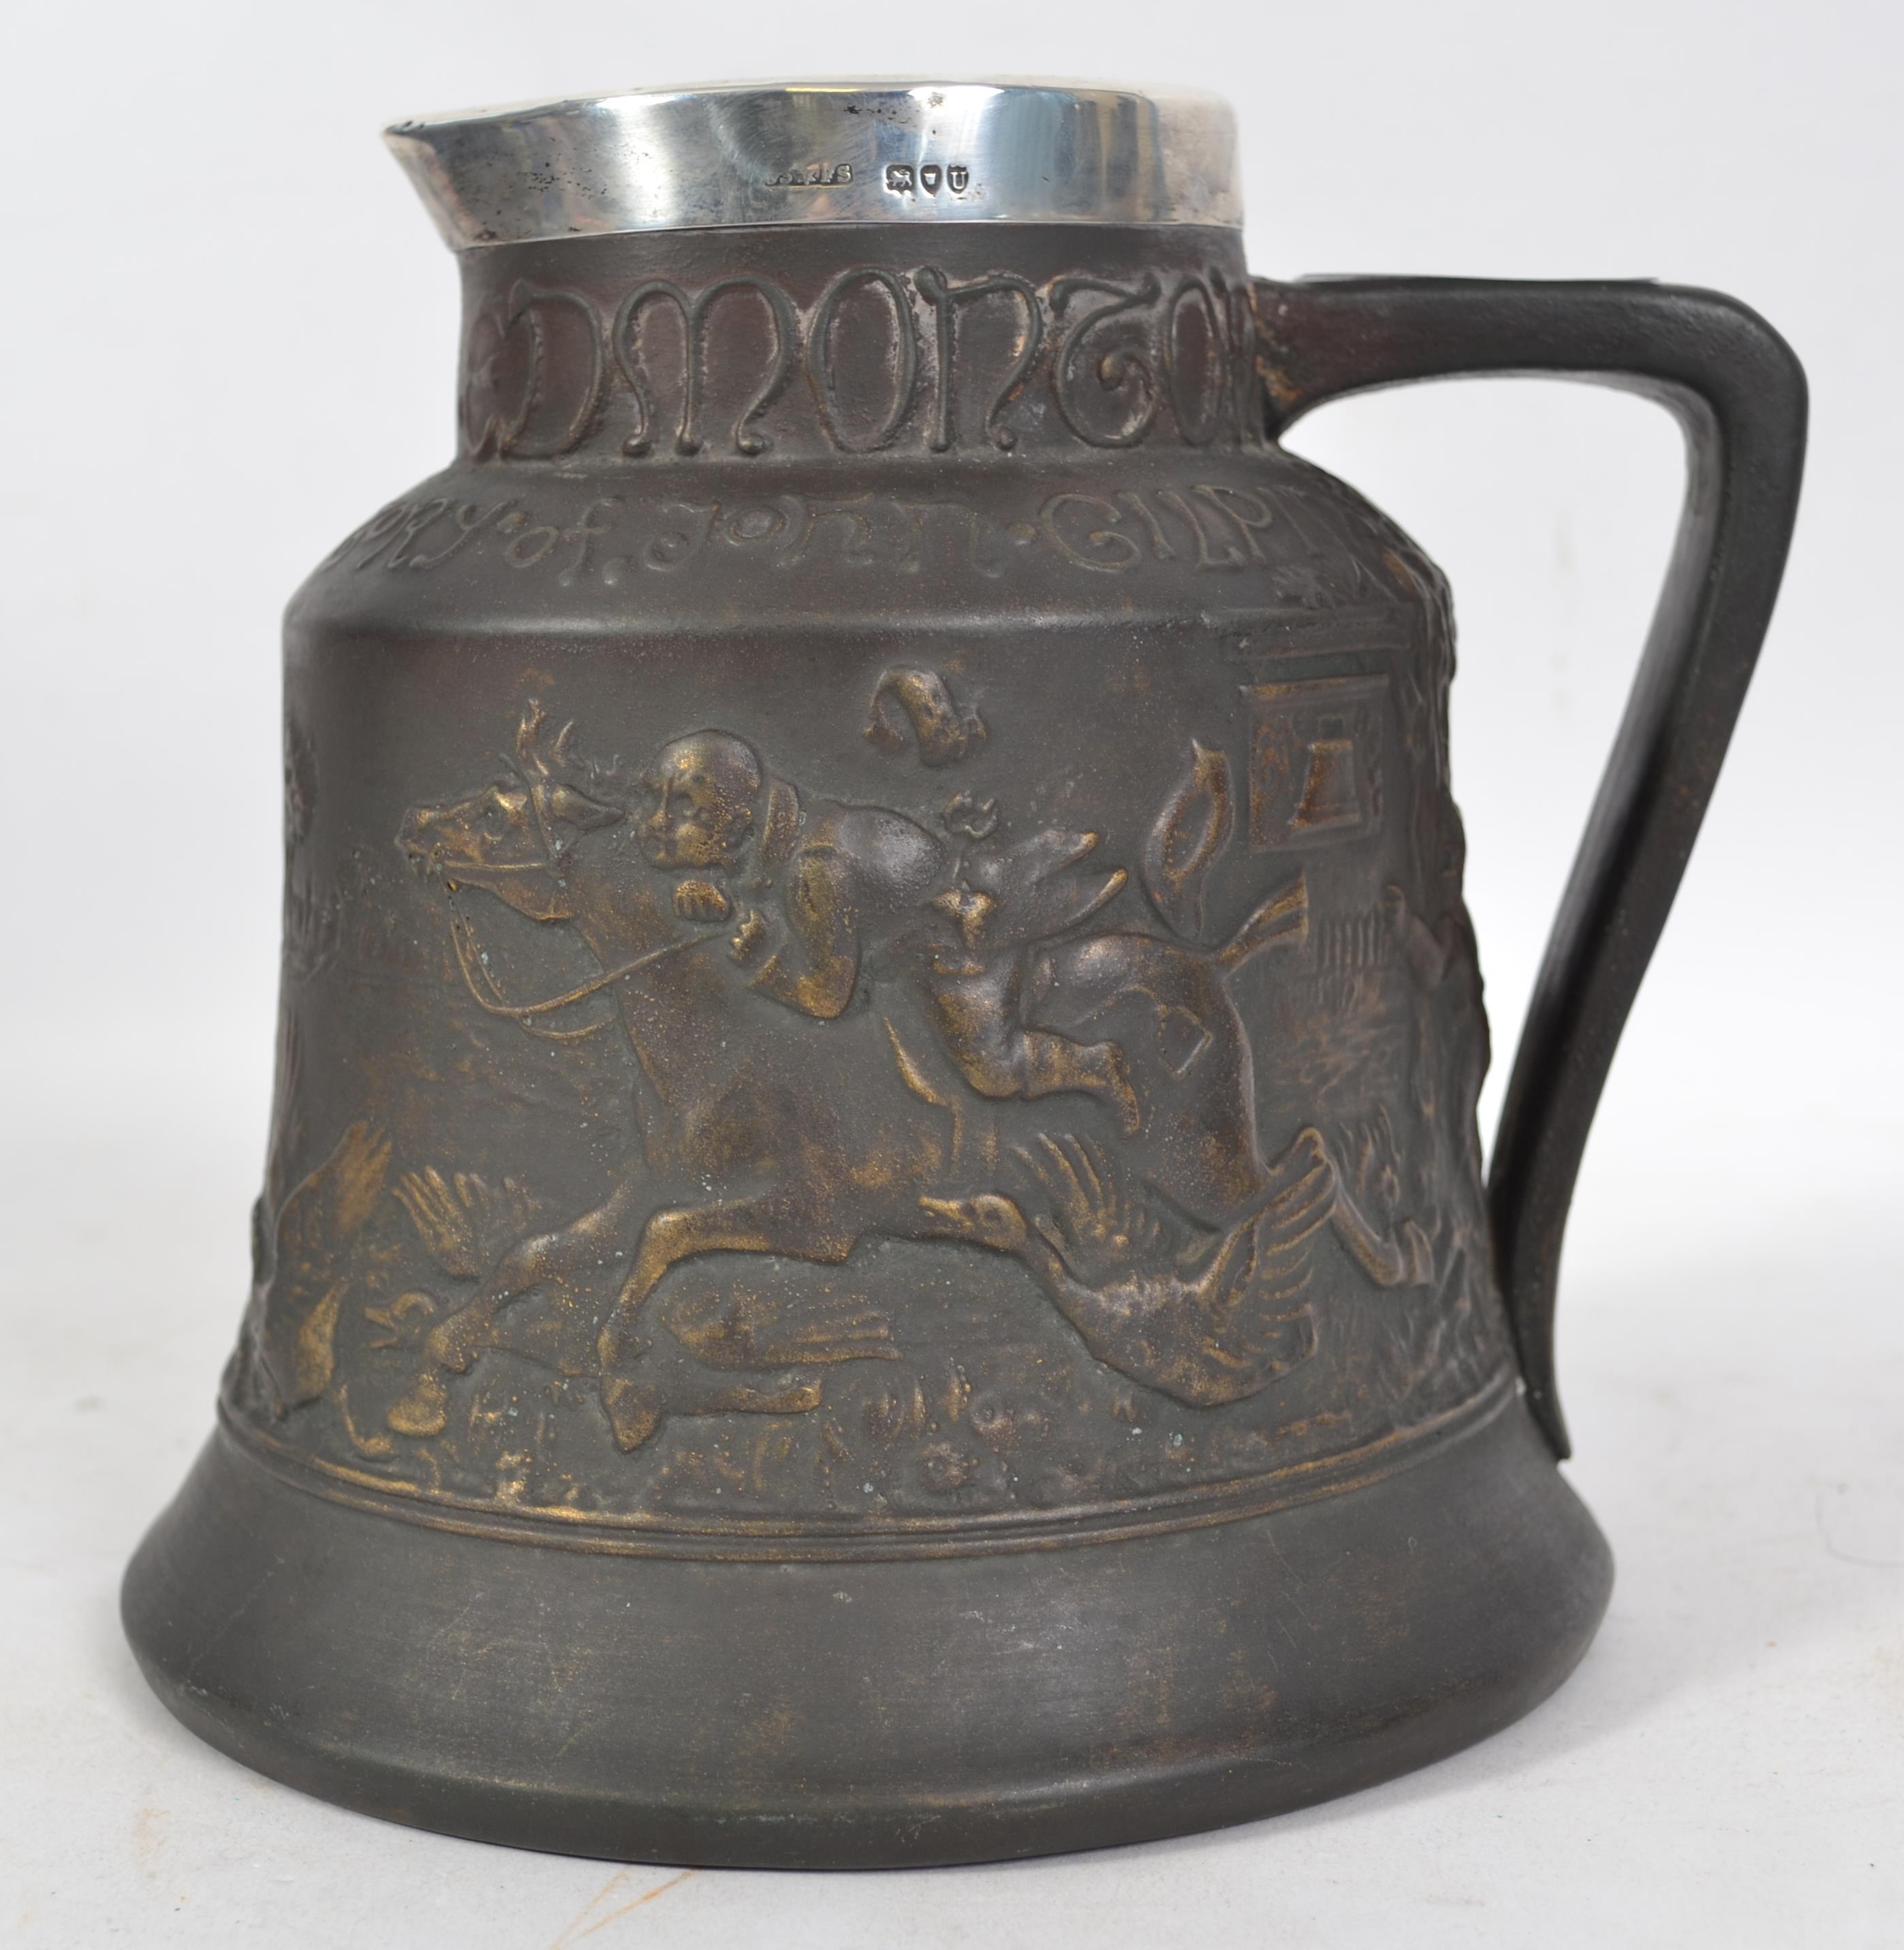 An early Macintyre bell-shaped jug with hallmarked